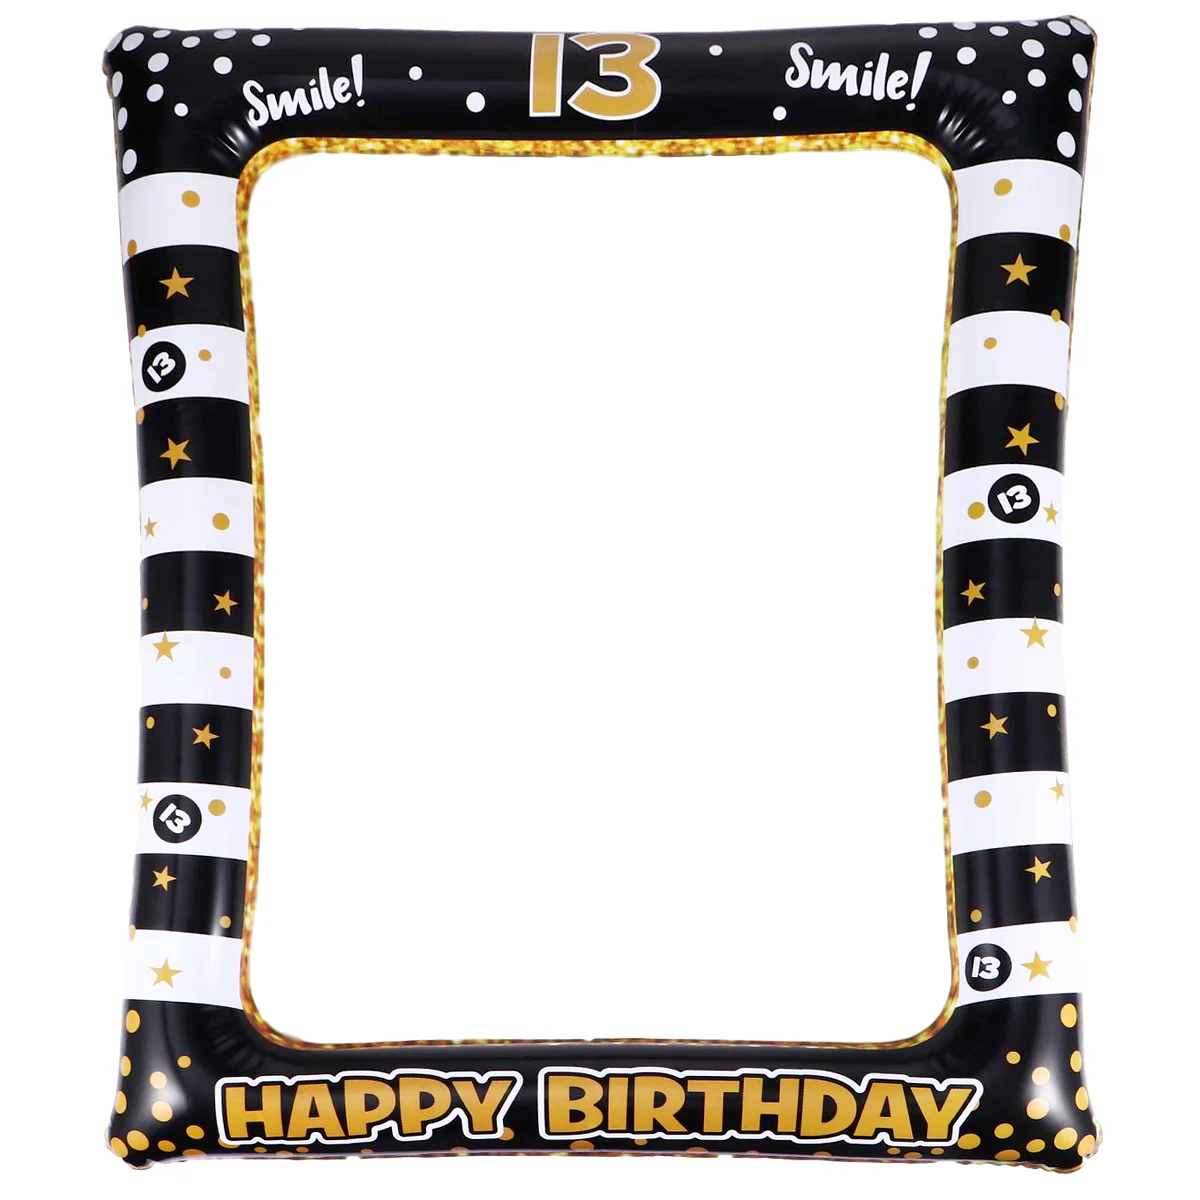 

Birthday Frame Photo Party Props Selfie 13Th Inflatable Booth Picture Prop Happy Festival Supplies Photography Pvc Funny Sign